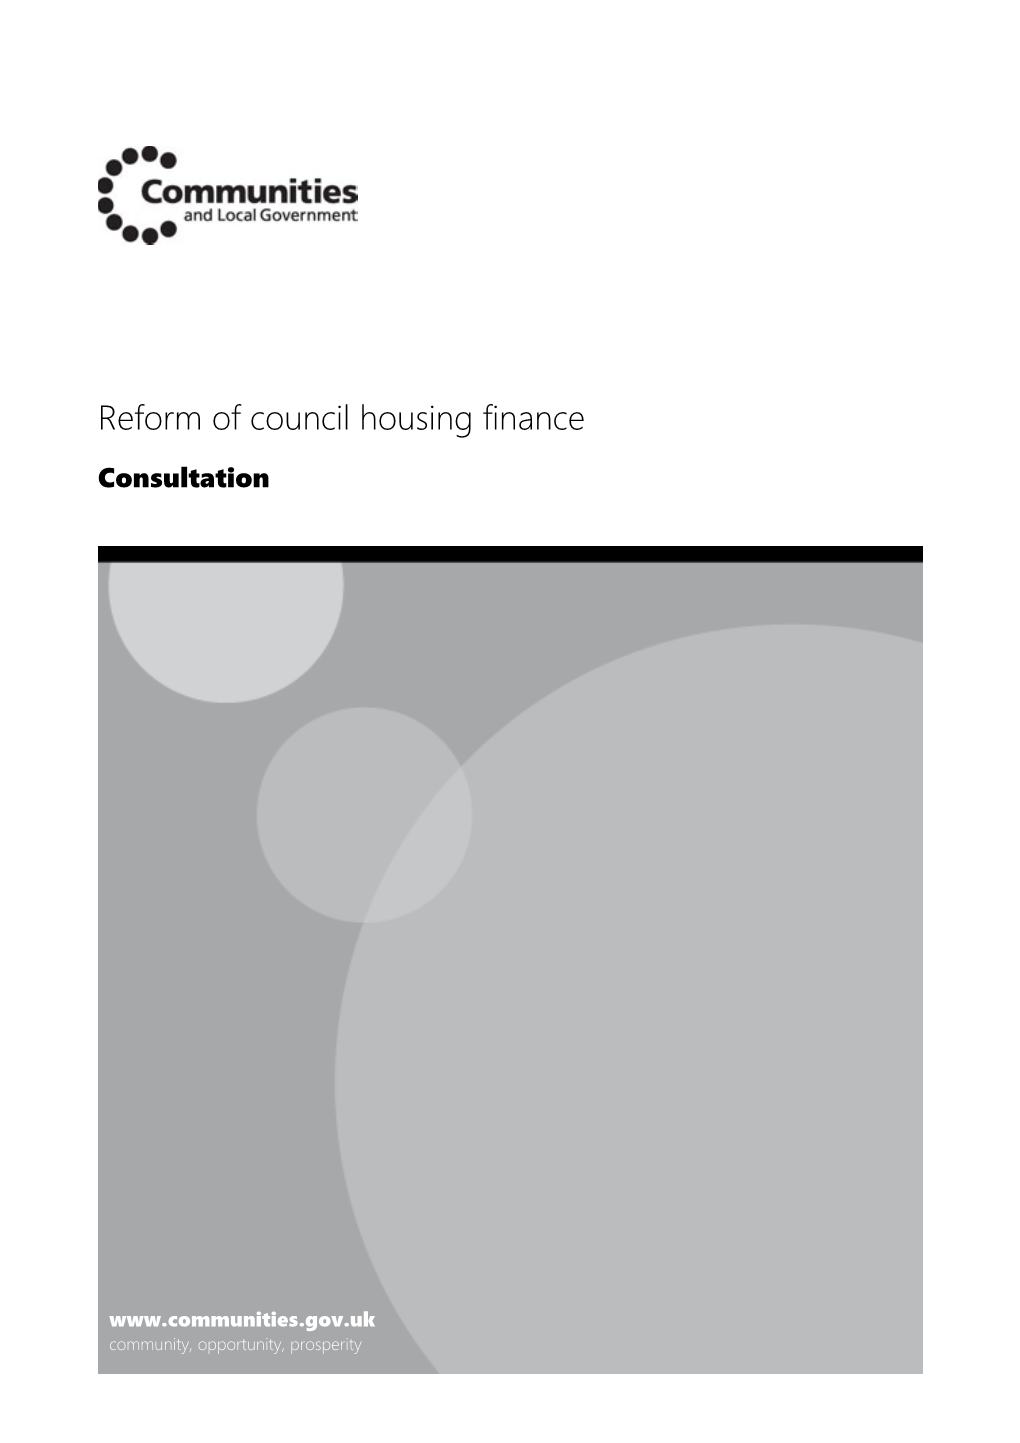 Reform of Council Housing Finance